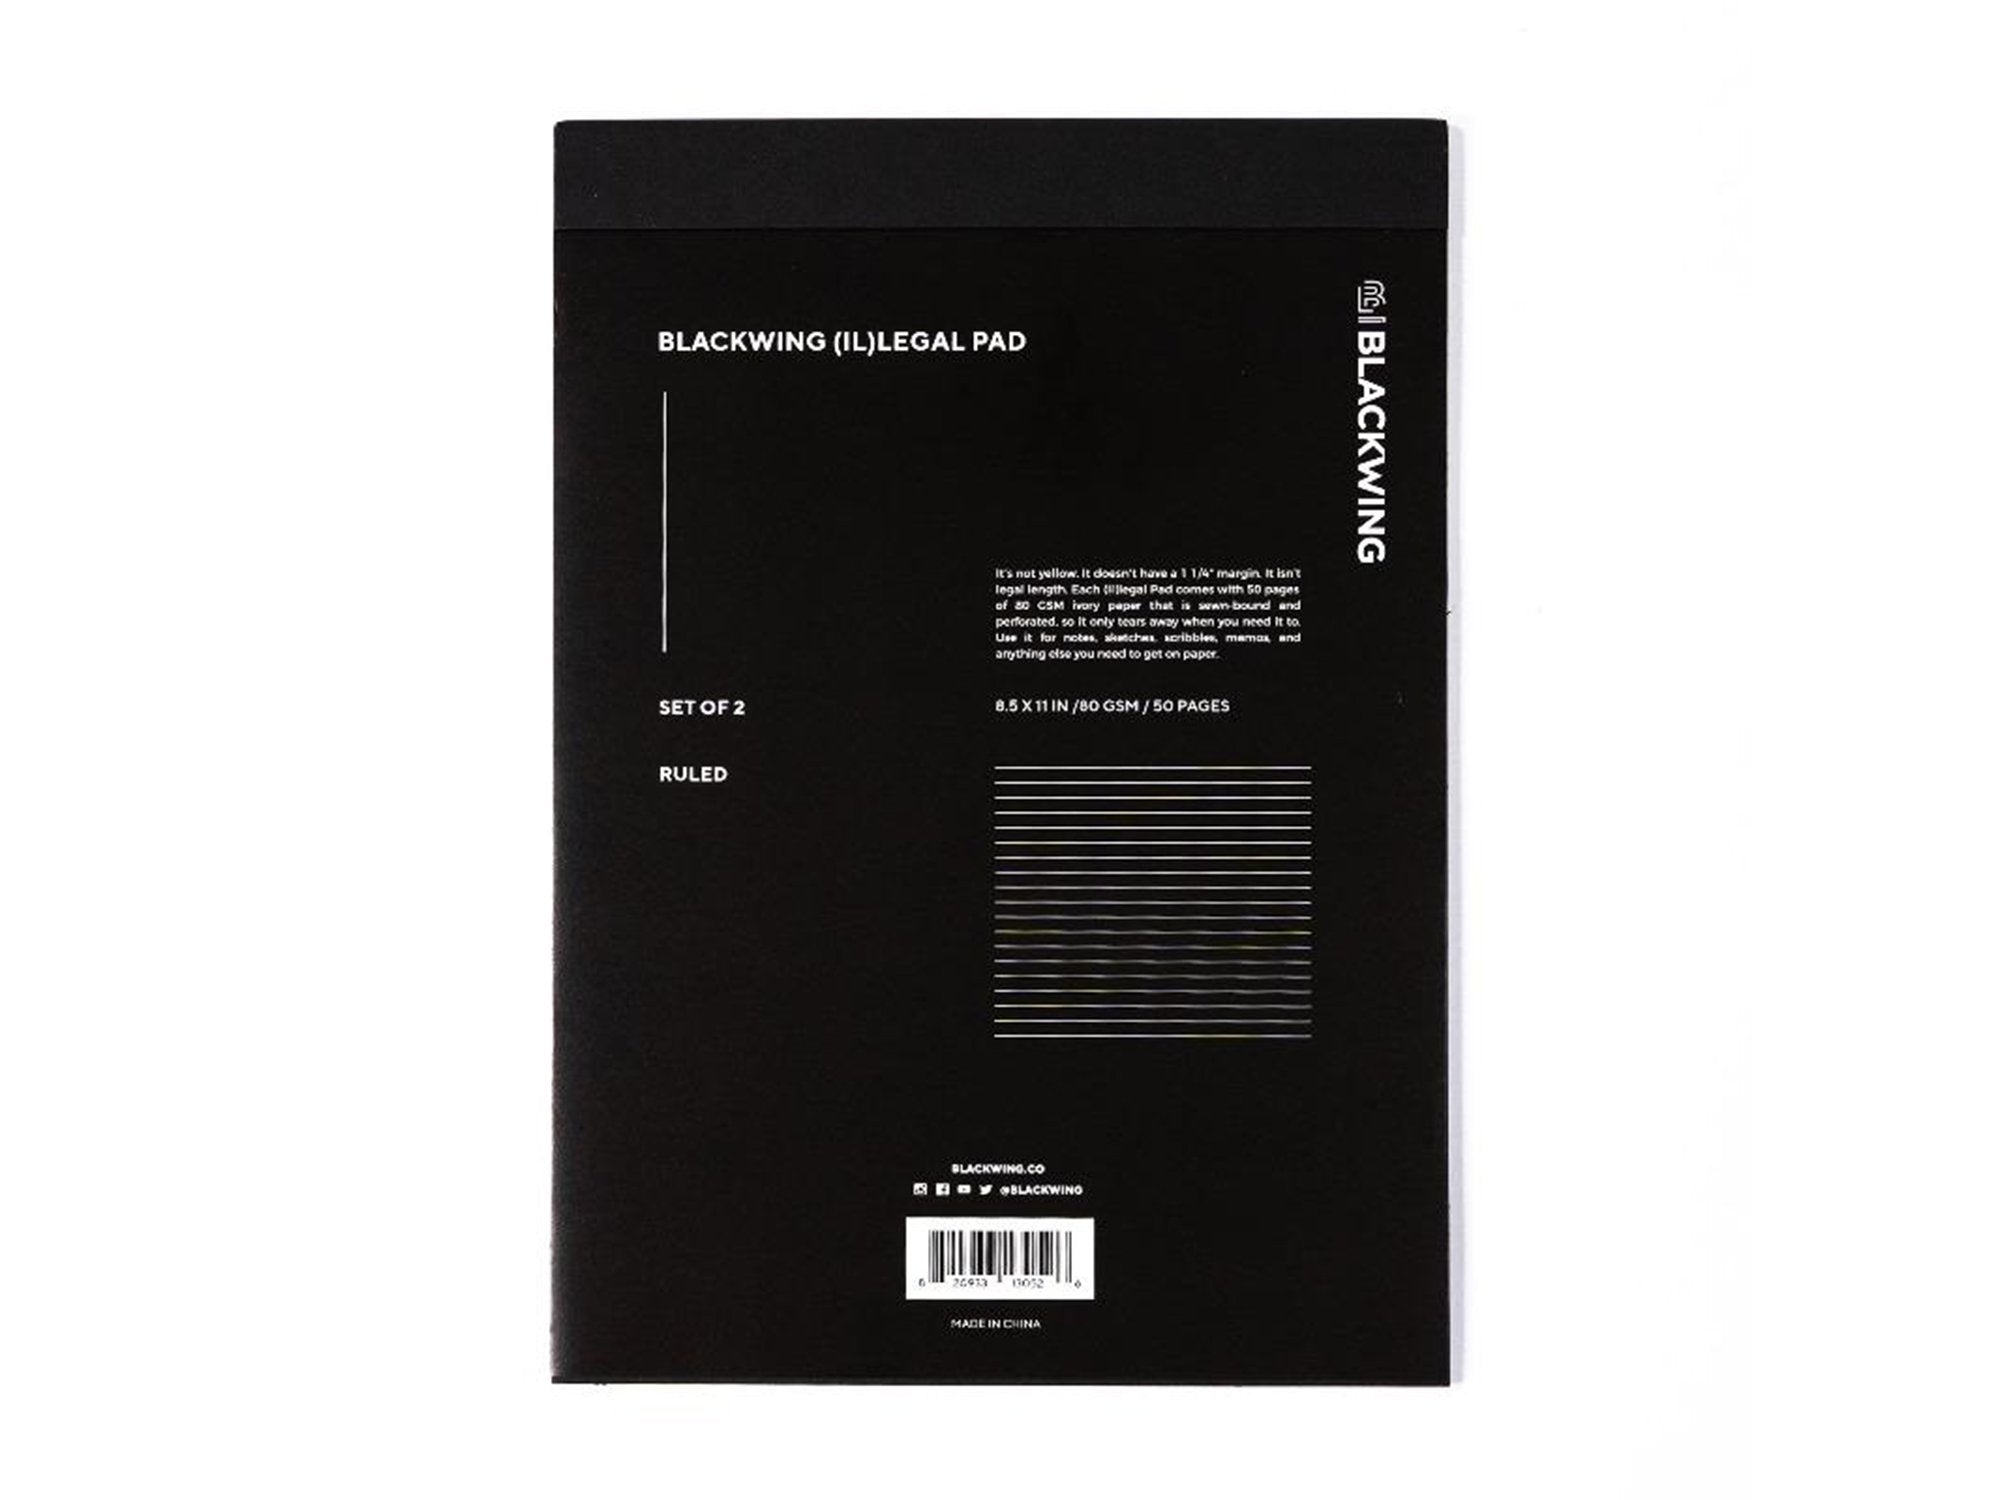 Blackwing Illegal Pad Set of 2 Ruled